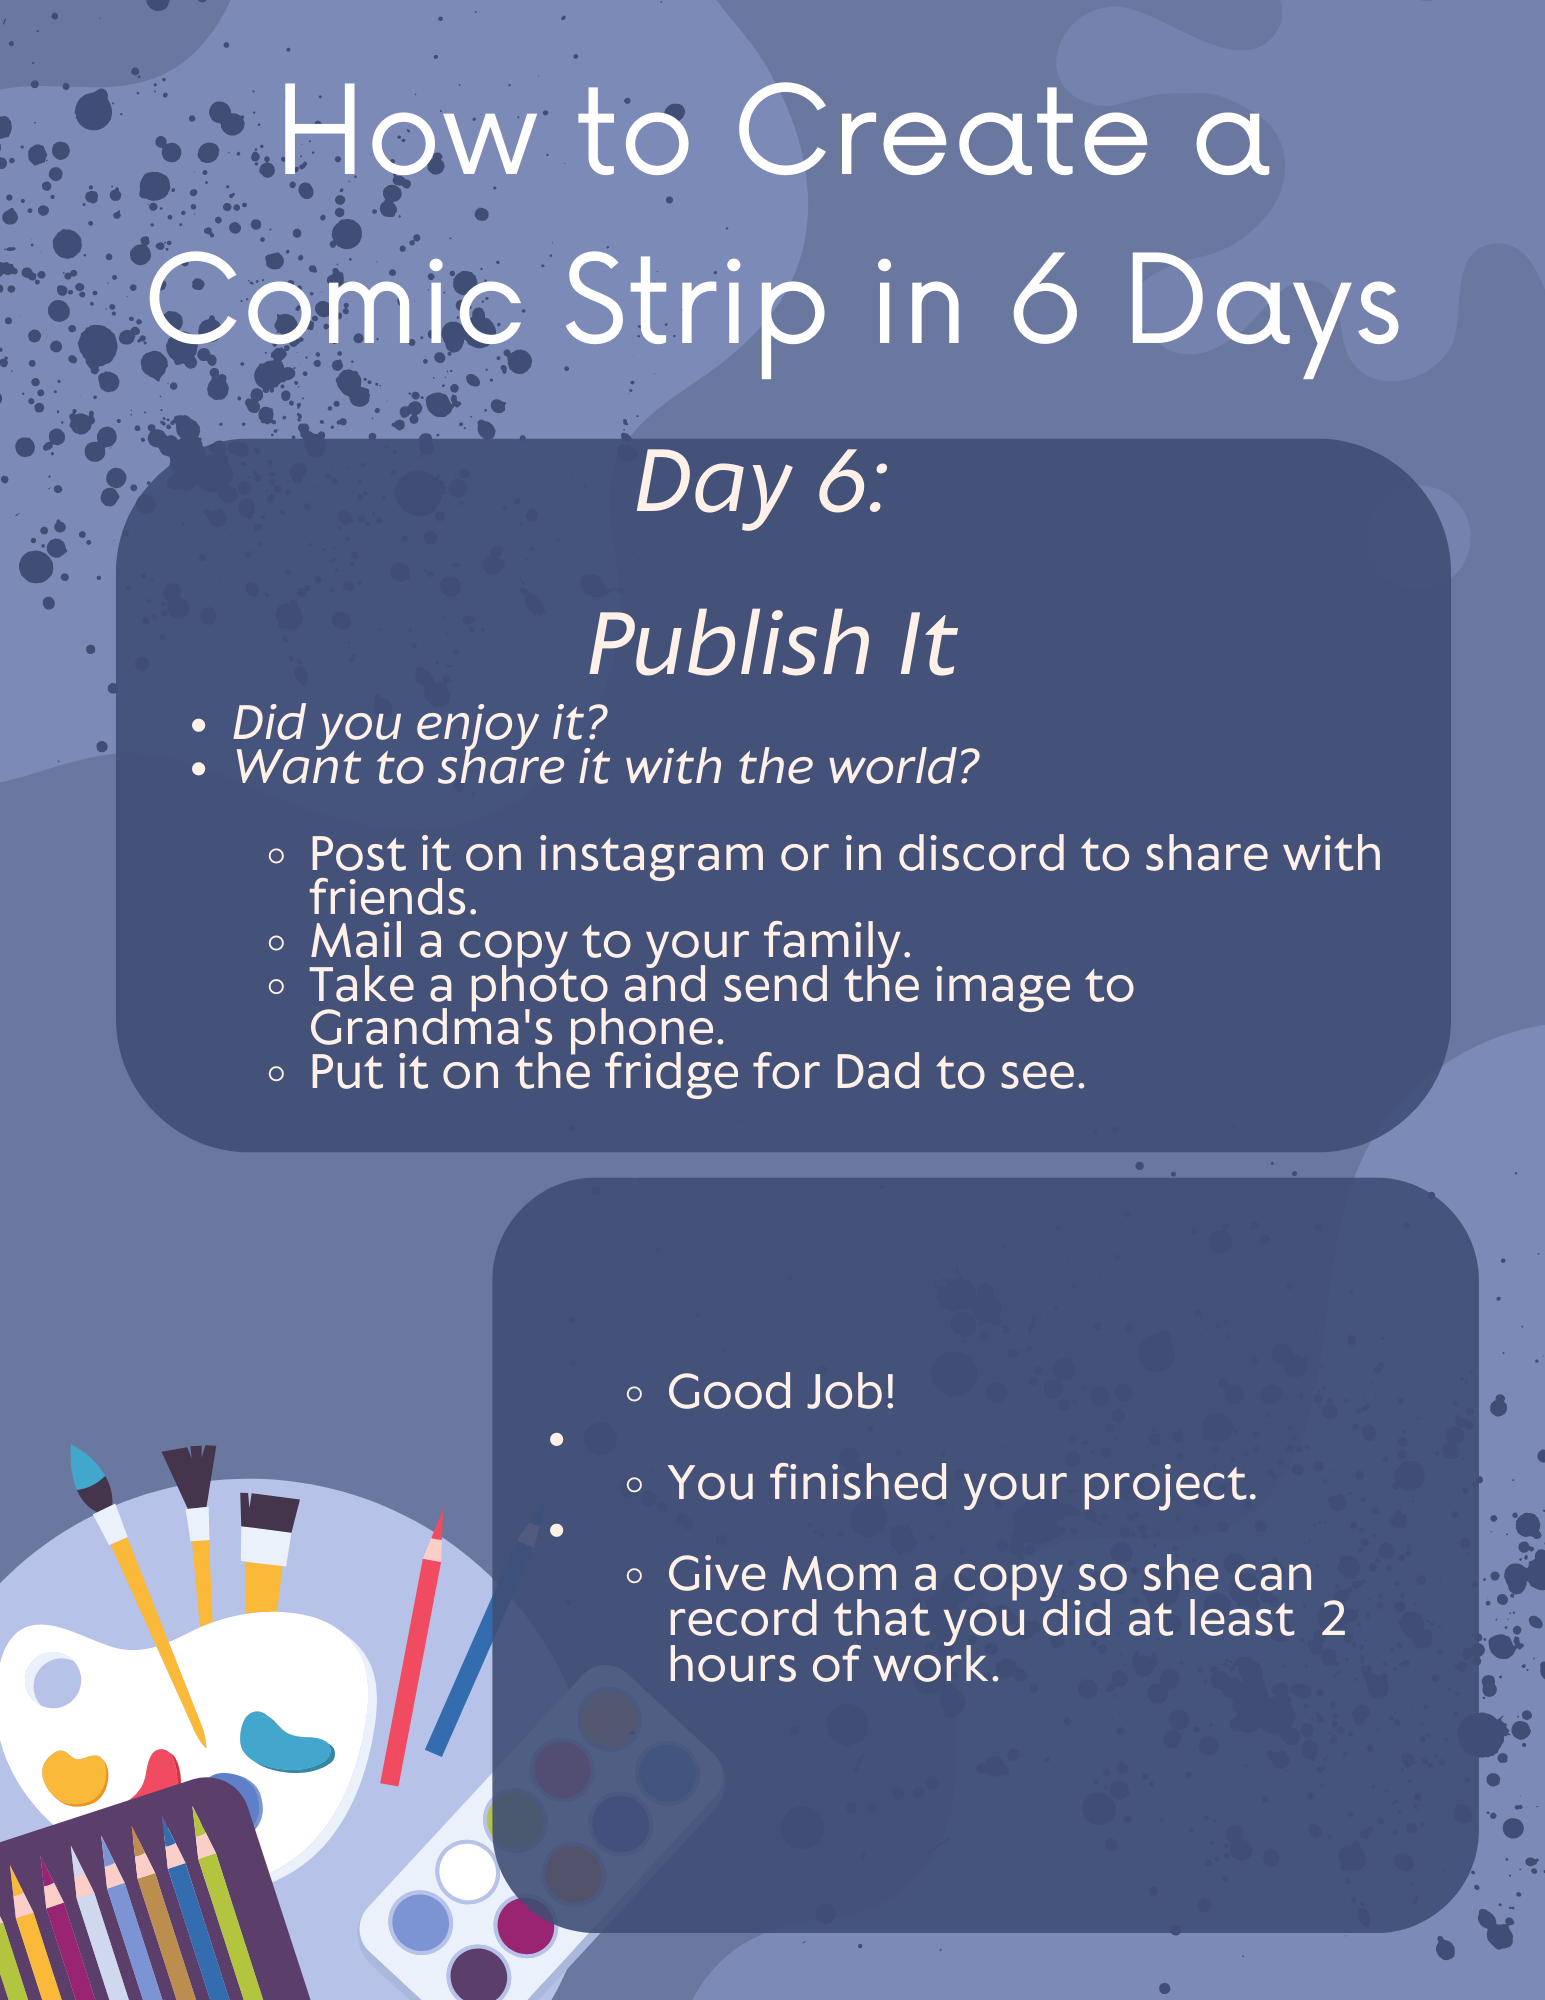 How to make a comic in 6 days – Day 6